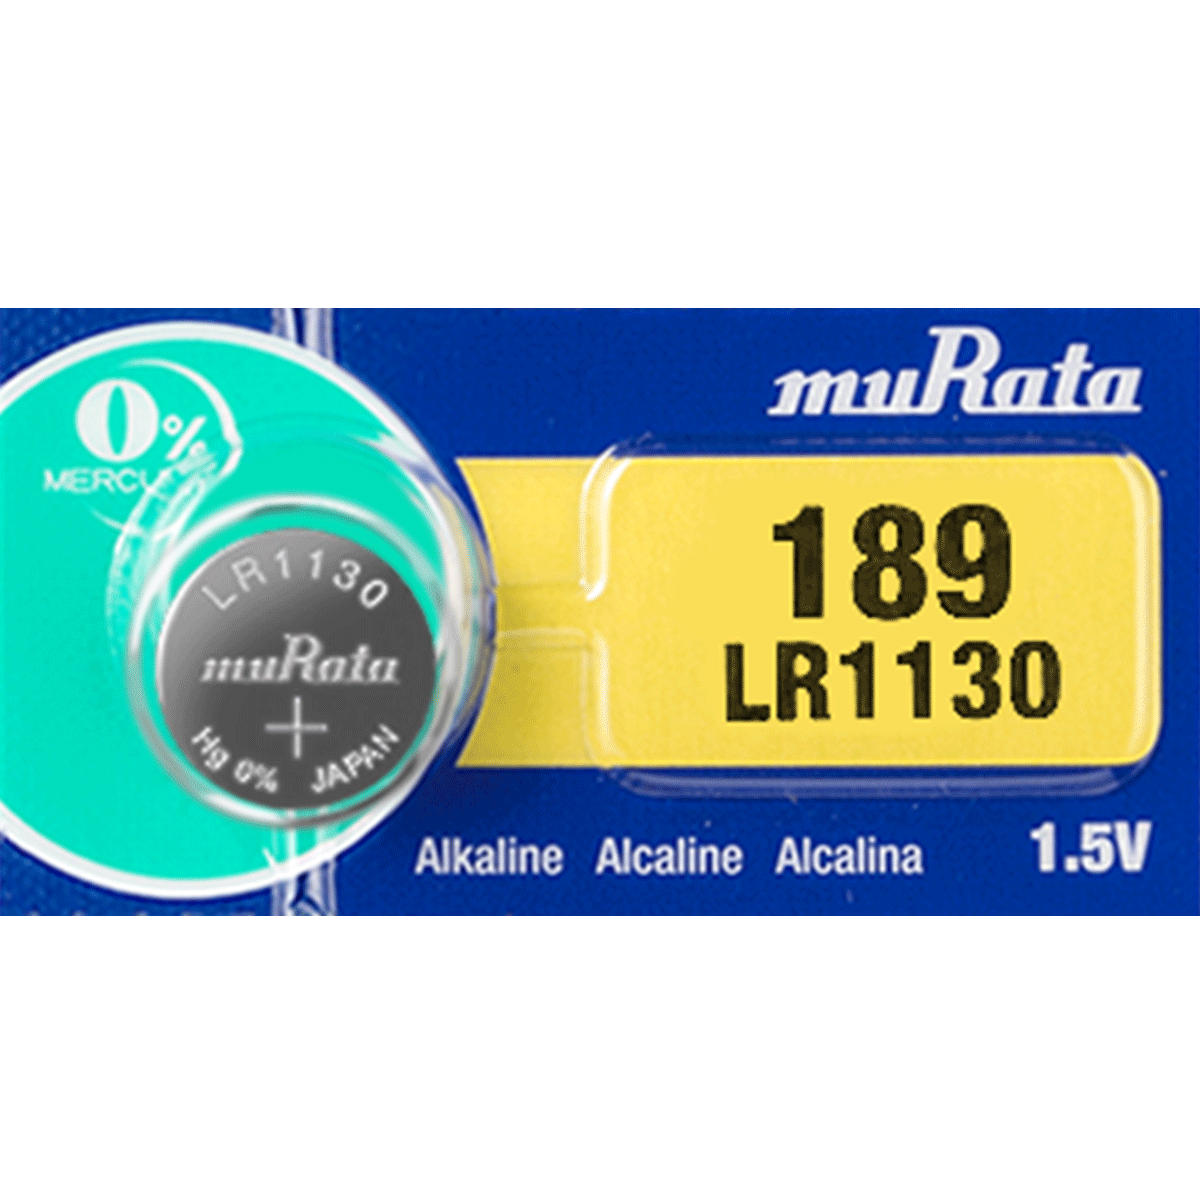 AG10 / LR1130 Alkaline Button Watch Battery 1.5V - 2 Pack - FREE SHIPPING!